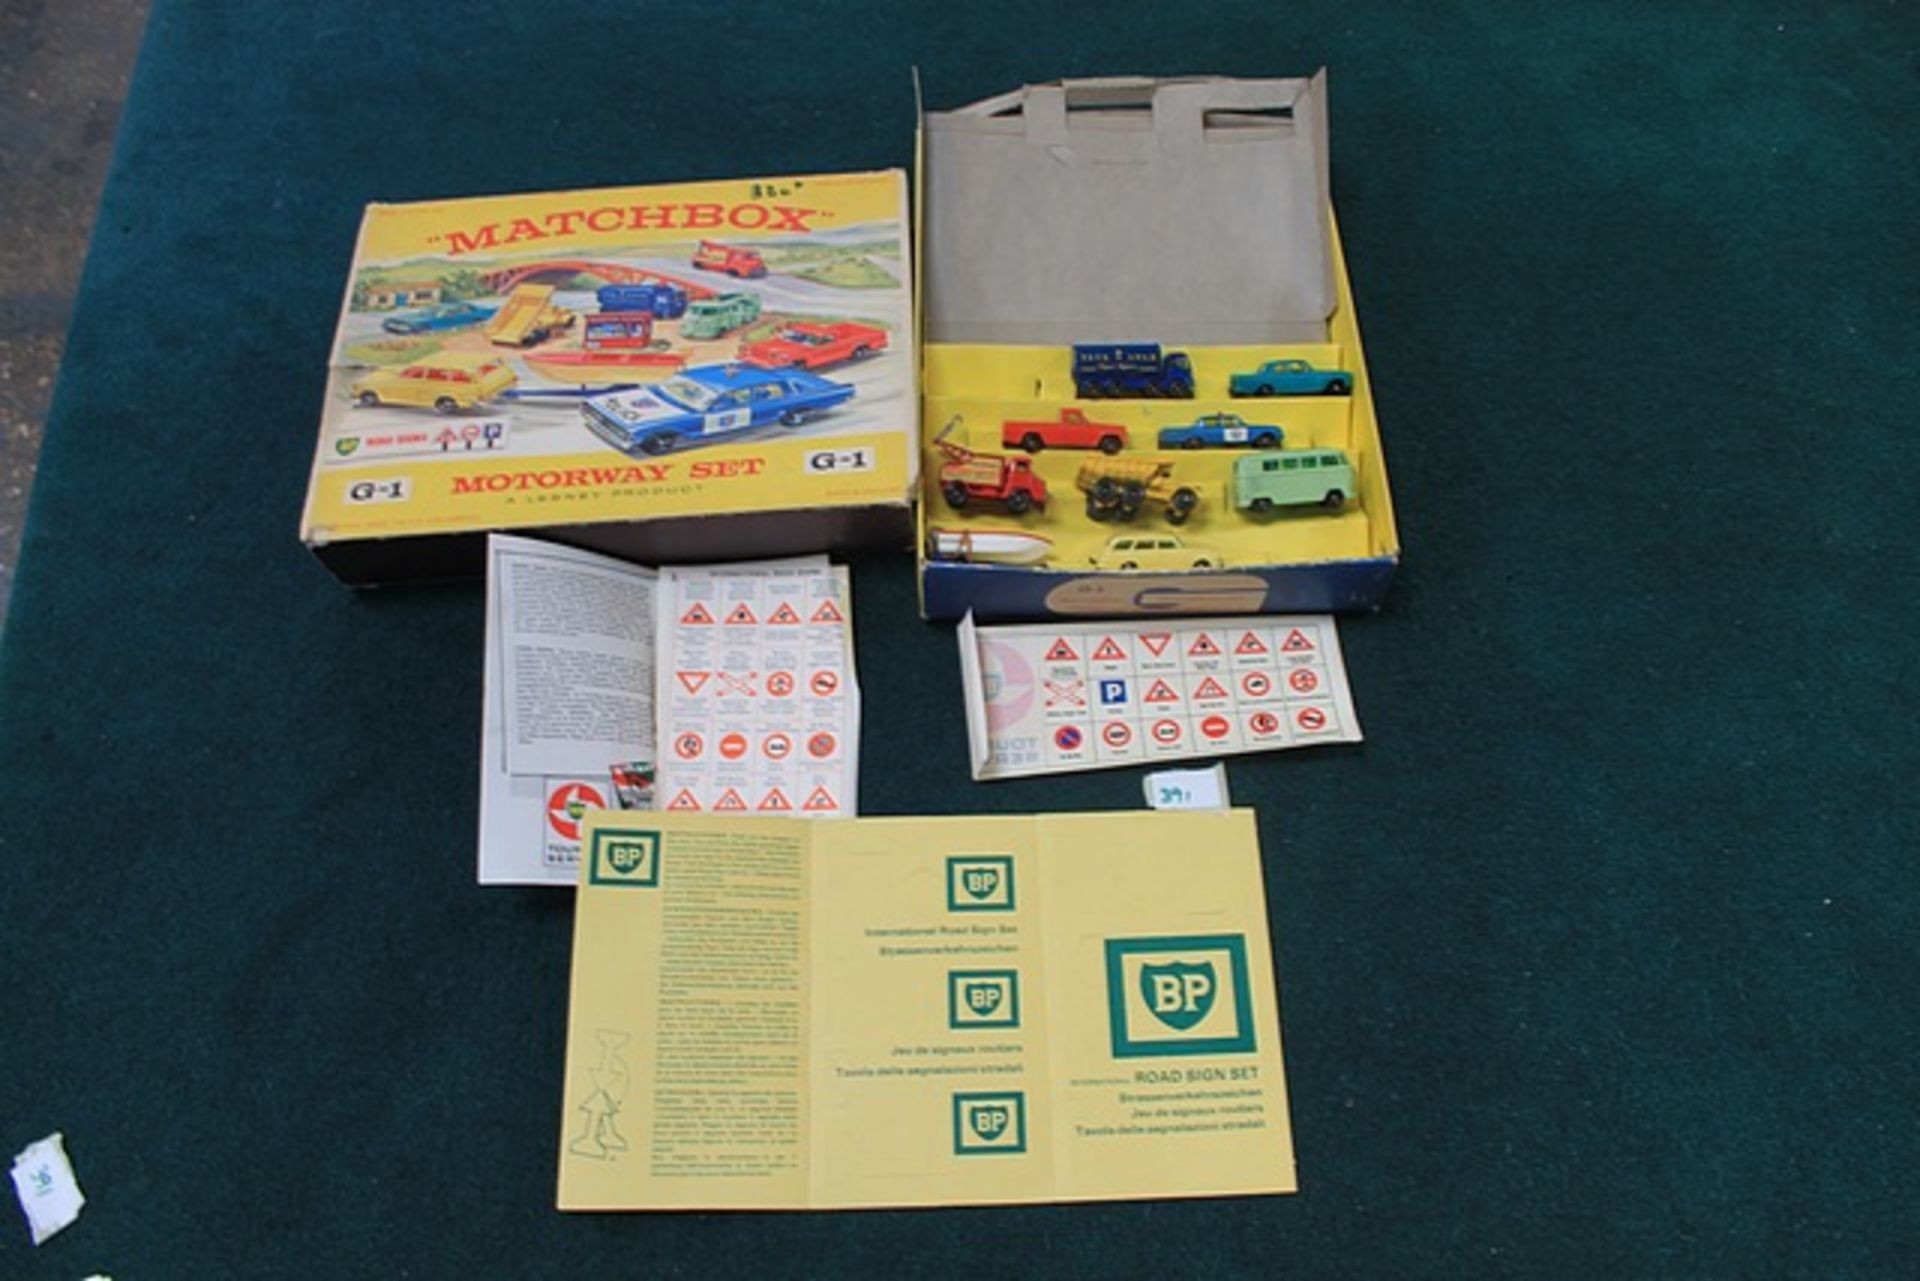 Matchbox Lesney Gift Set Motorway Set Number G-1 Comprising Of 8 Diecast Vehicles And A Boat - Image 2 of 4